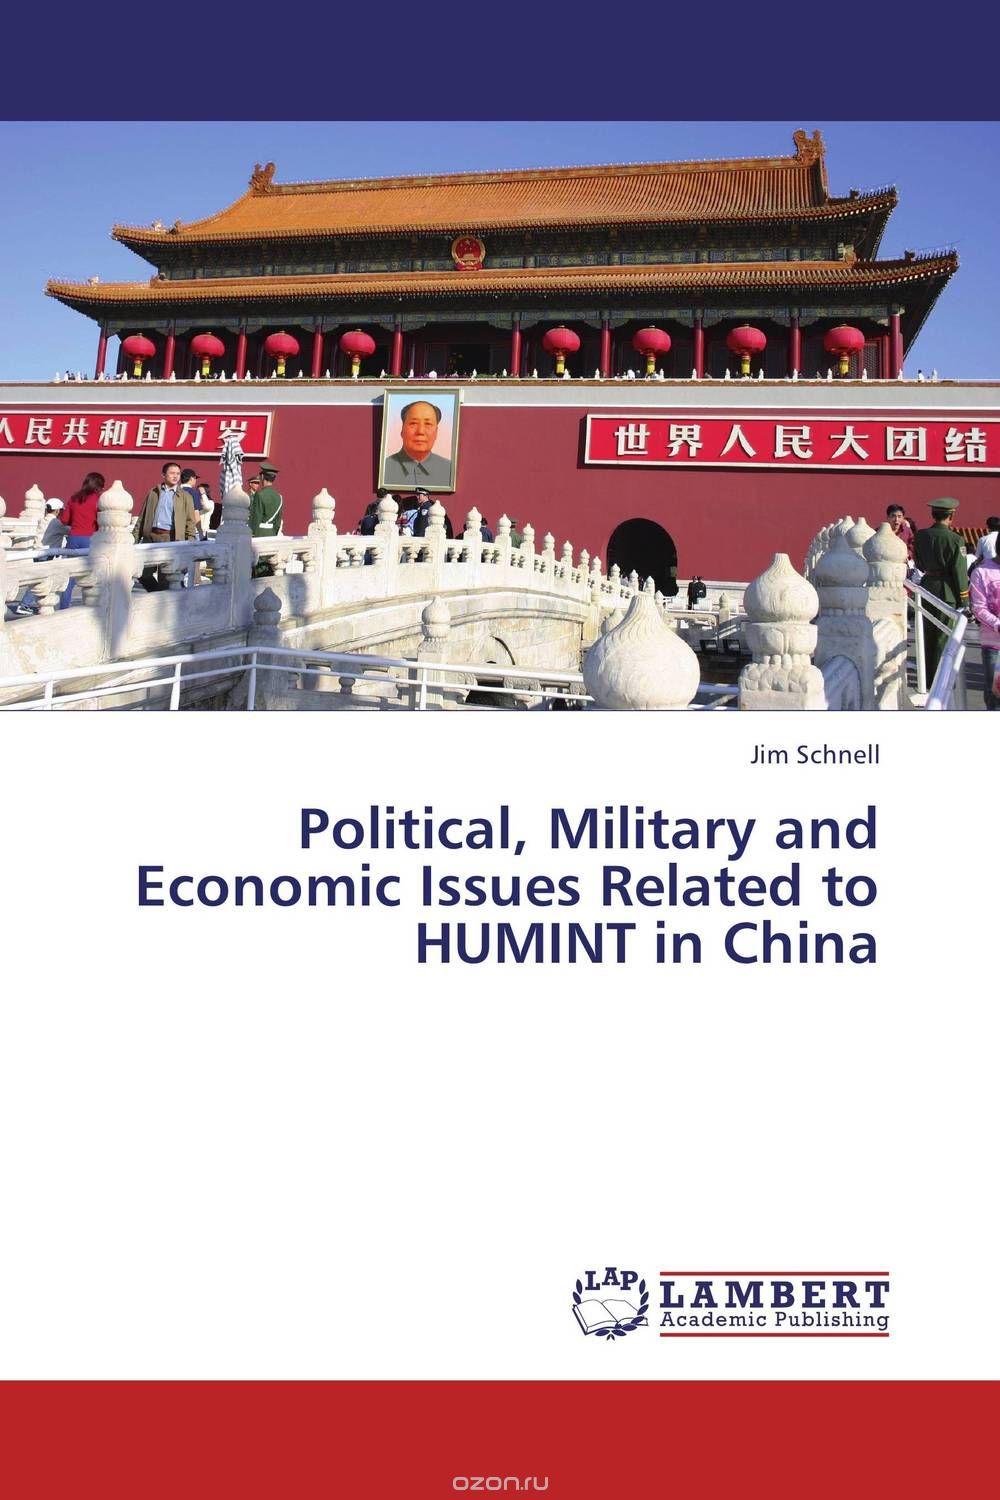 Political, Military and Economic Issues Related to HUMINT in China